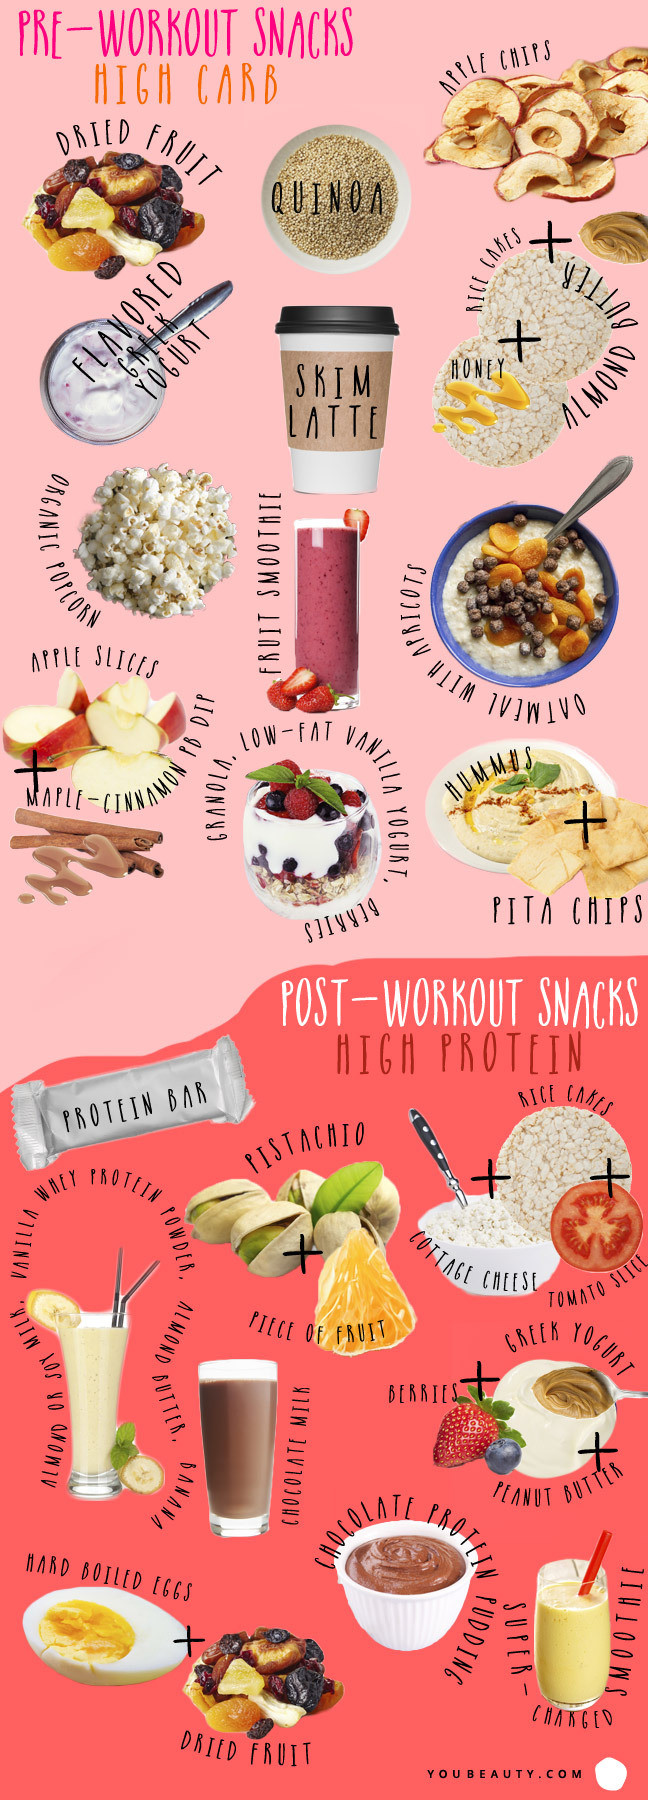 Healthy Snacks After Workout
 Nutritionist Approved Pre and Post Workout Snacks